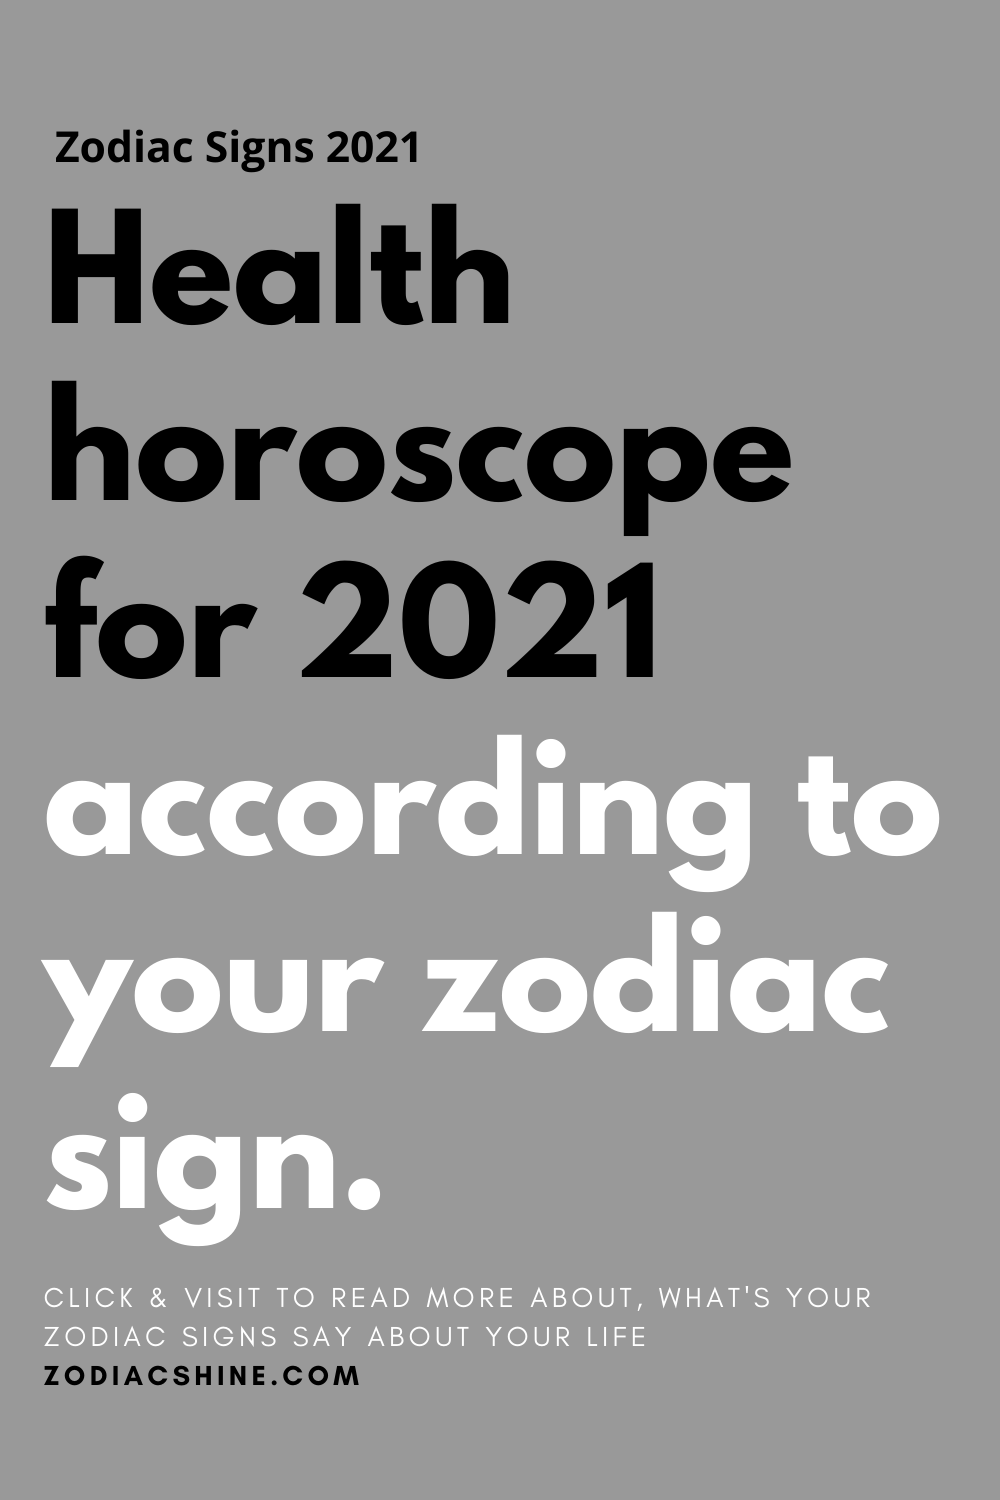 Health horoscope for 2021 according to your zodiac sign.